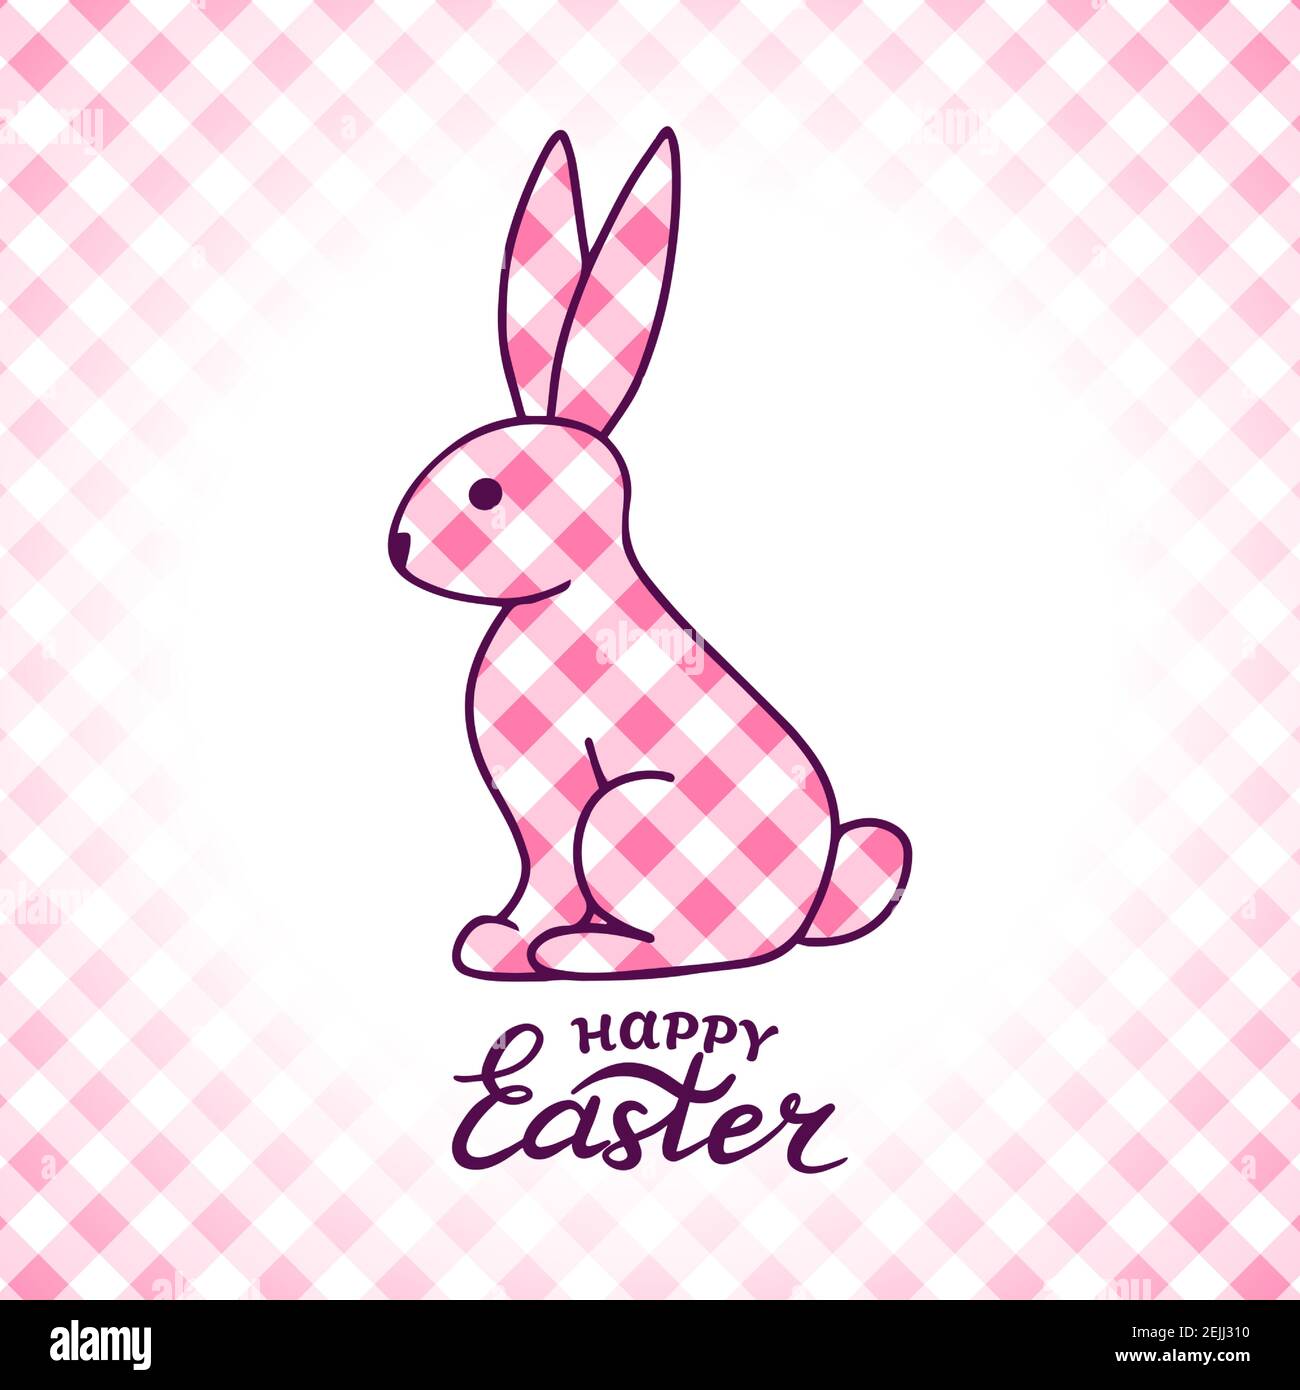 Cute rabbit on a checkered background. Suitable for Easter cards, invitations, posters, as well as for the covers of diaries and notebooks. Hand-drawn Stock Vector